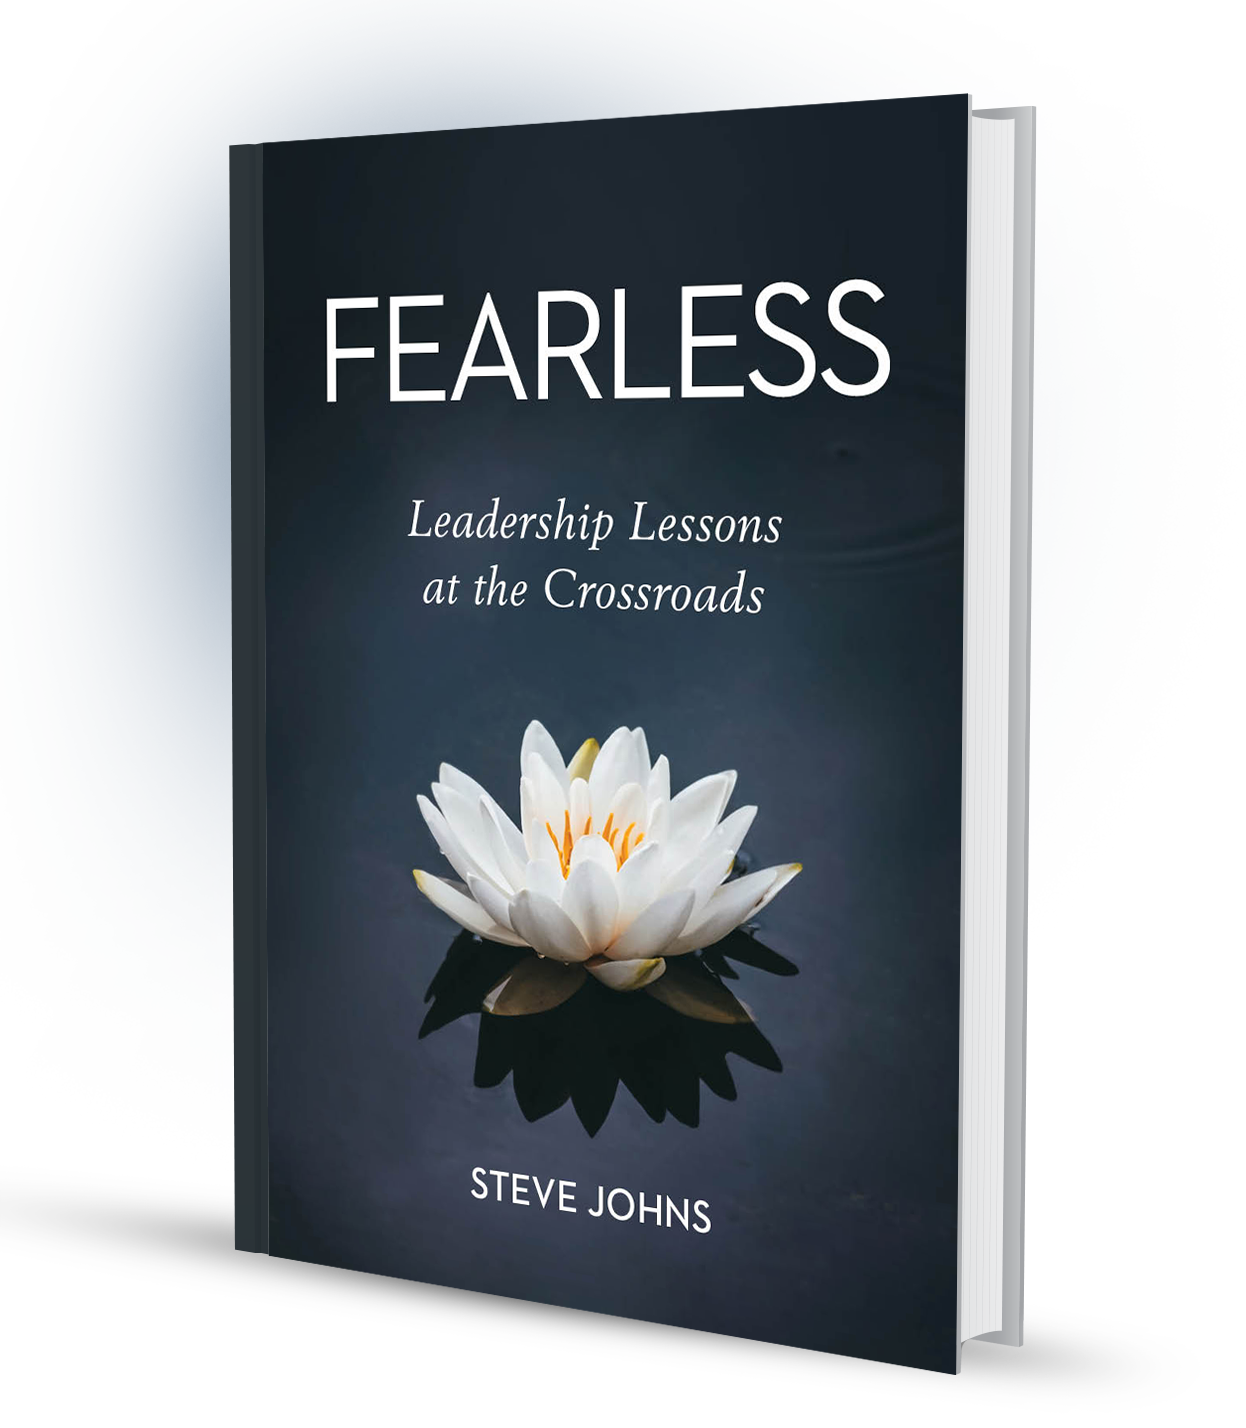 FEARLESS: Leadership Lessons at the Crossroads